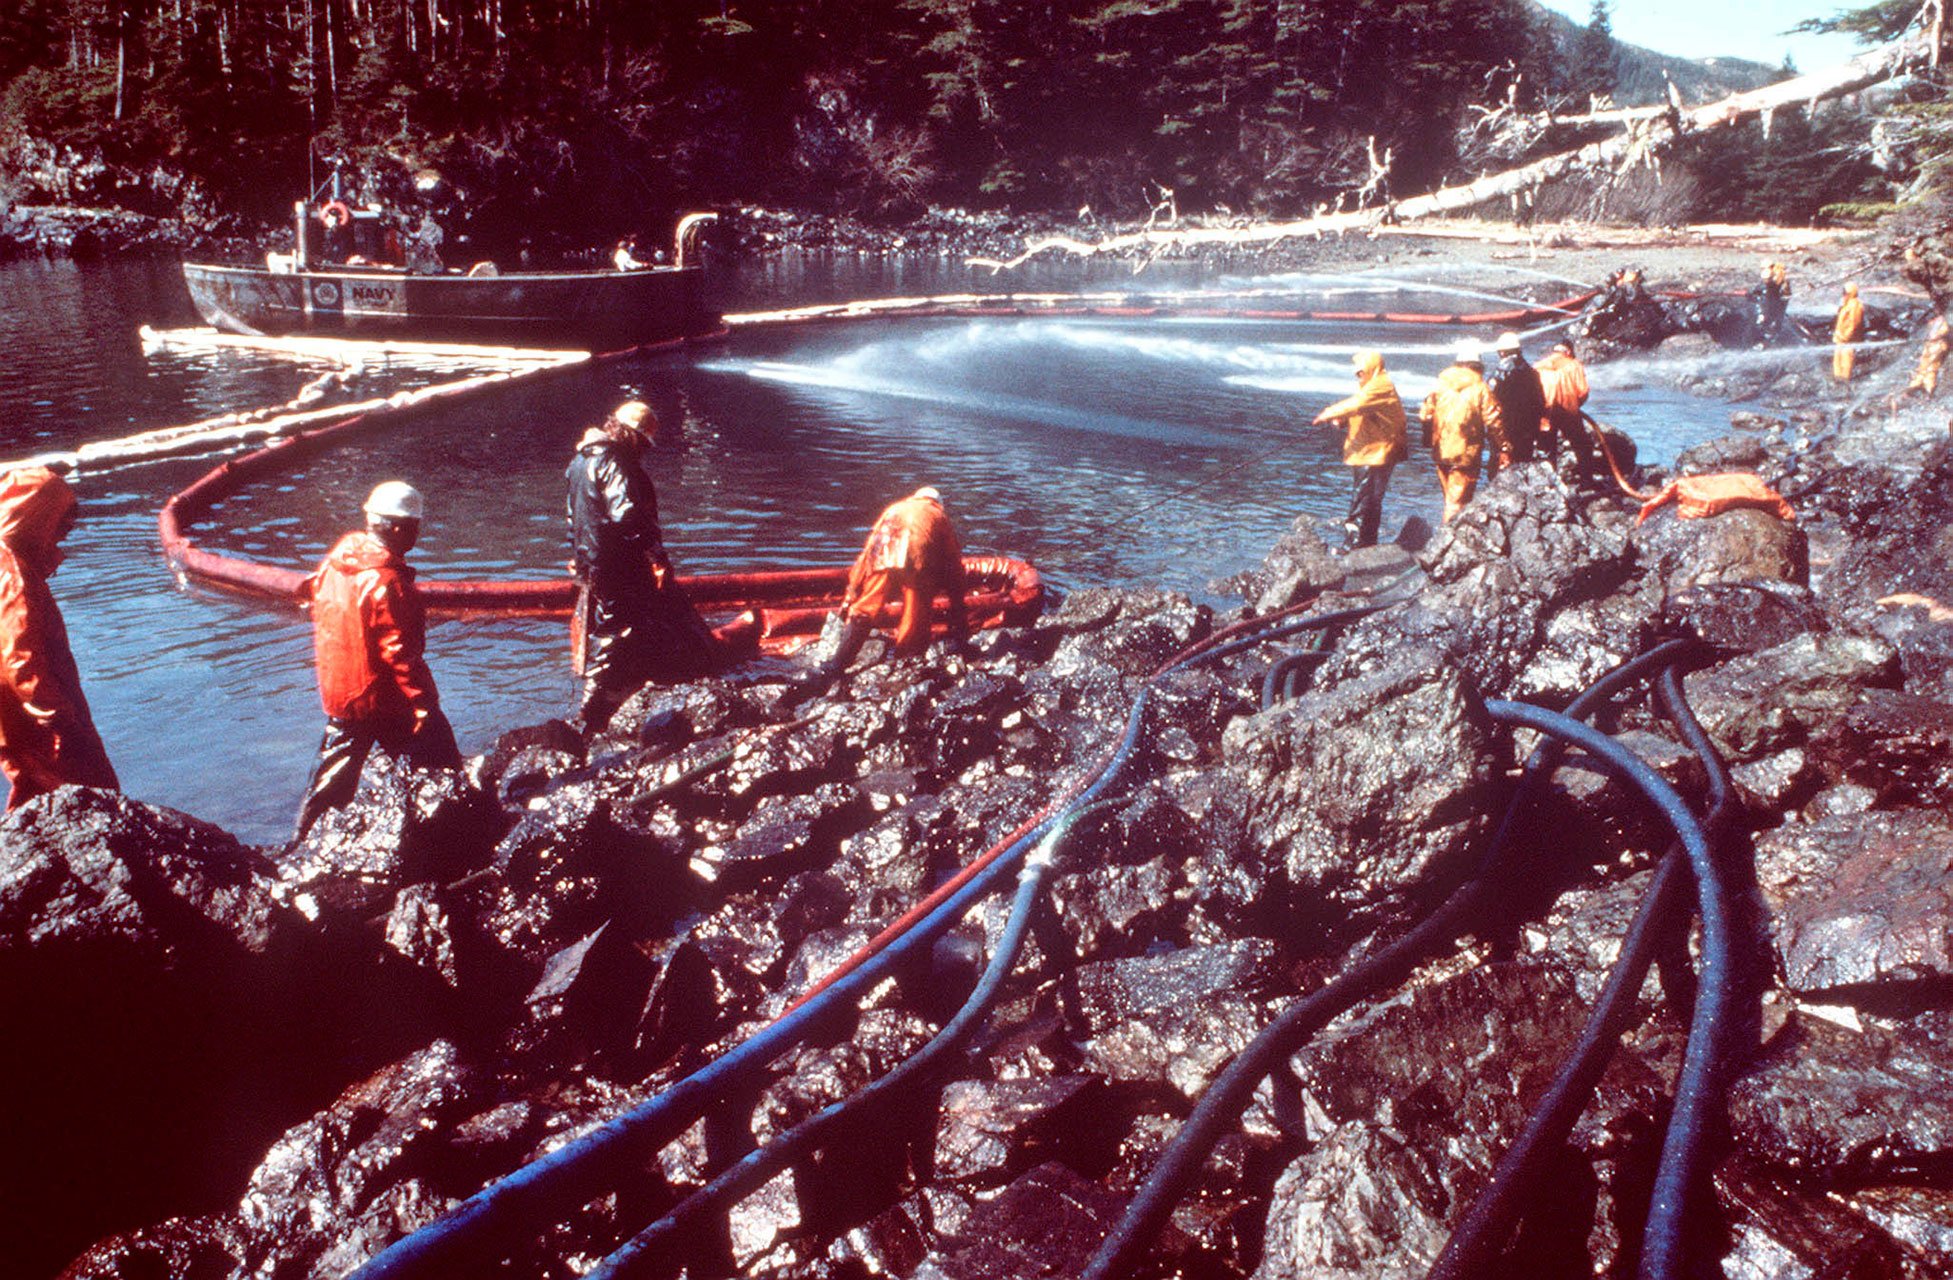 On March 28,1989, workers steam-blasted rocks and washed down Alaskan shorelines soaked in crude oil from the leaking tanker Exxon Valdez, which ran aground on Bligh Reef in Prince William Sound, Alaska, on March 23, 1989. It spilled 11 million gallons of crude oil, which resulted in the largest oil spill in U.S. history until the Deepwater Horizon disaster in 2010.